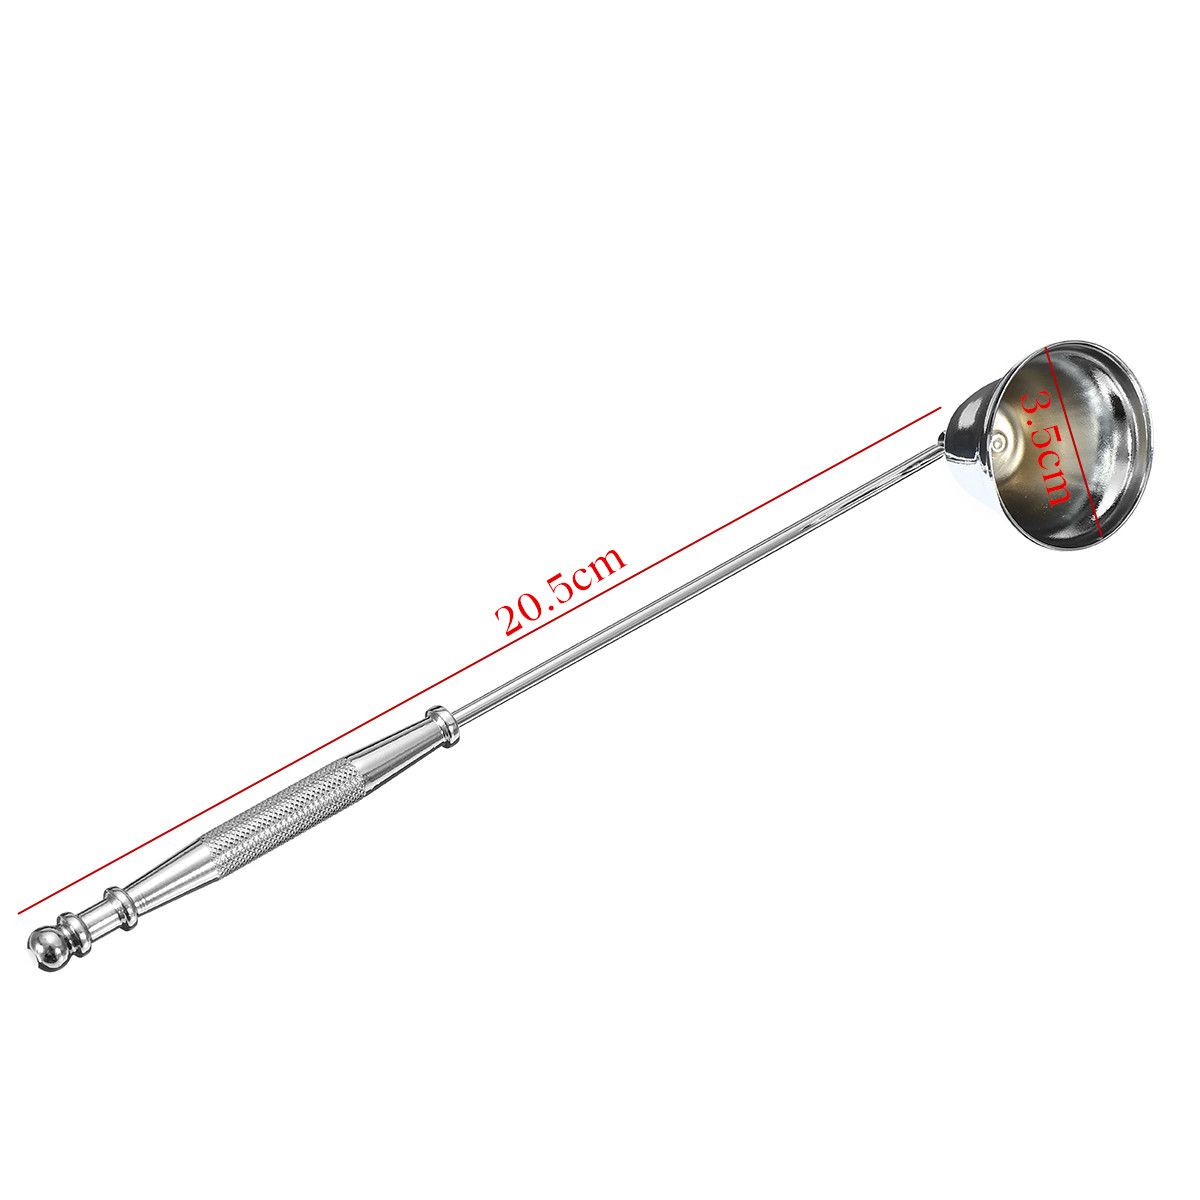 Stainless-Steel-Candle-Snuffer-Silver-Long-Extinguisher-for-Tea-Light-Candle-Tool-1252840